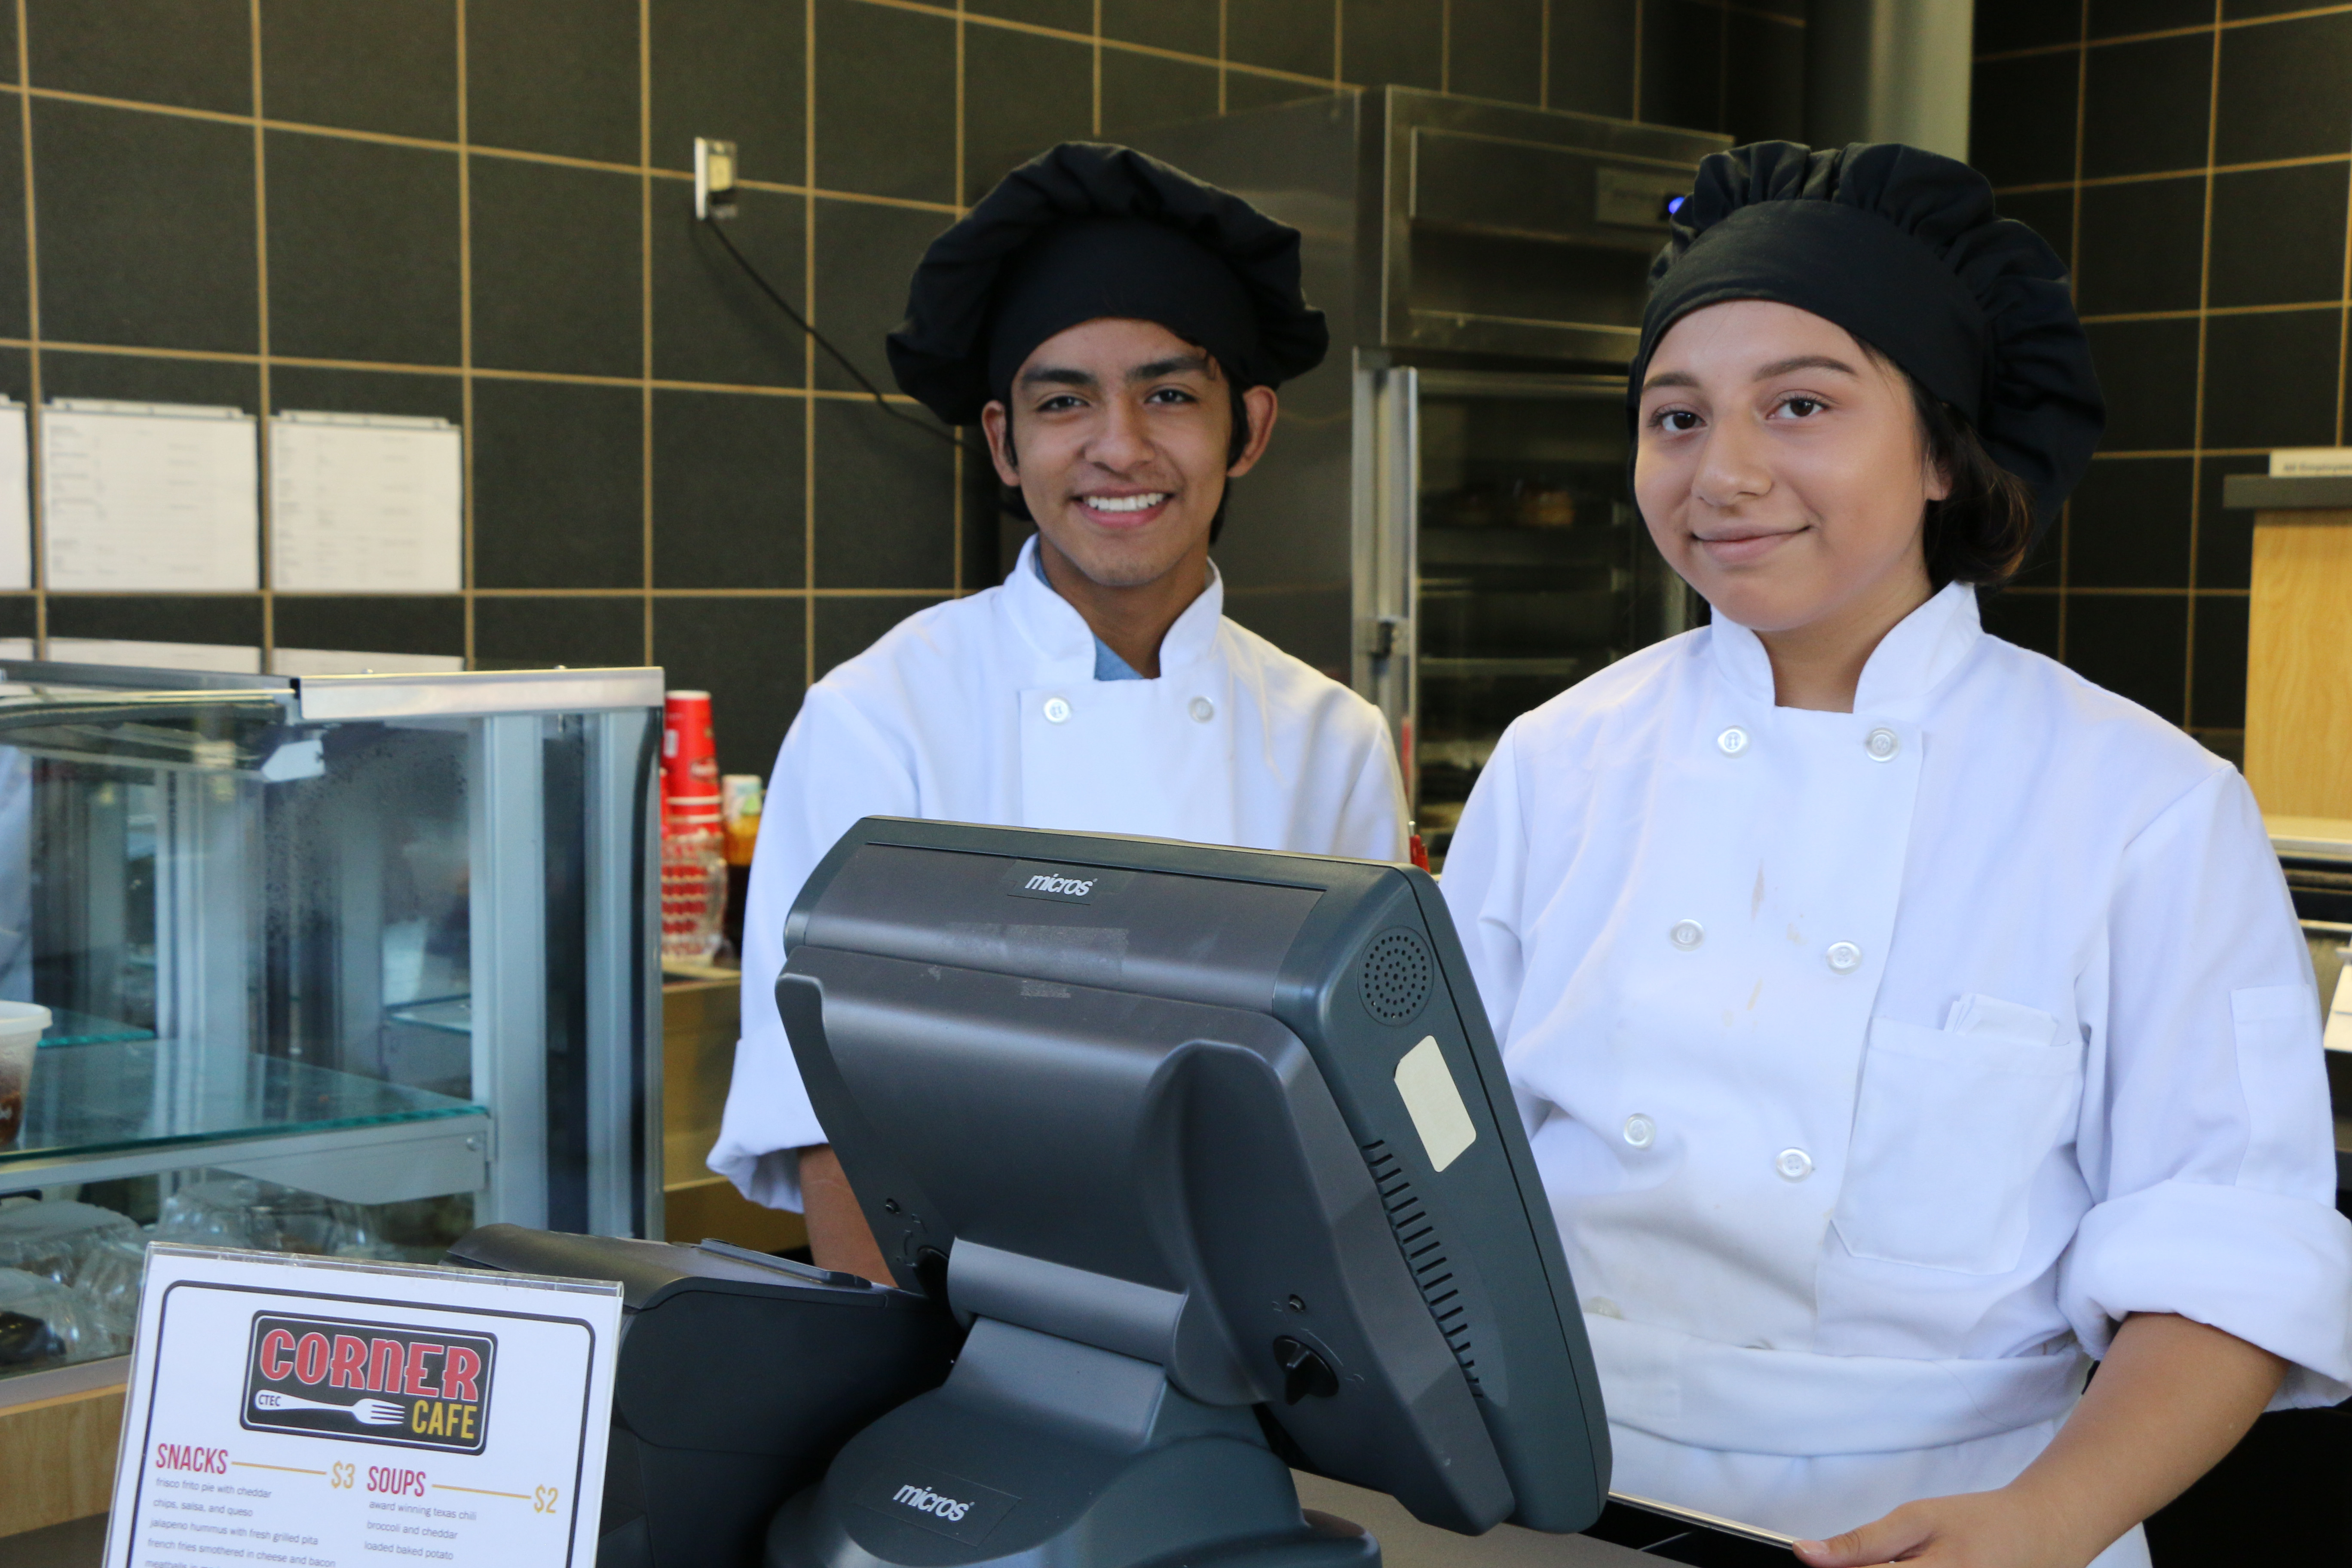 Two culinary students are stationed at the cash register of an eating establishment. They wear white chefs coats and black chefs hats.